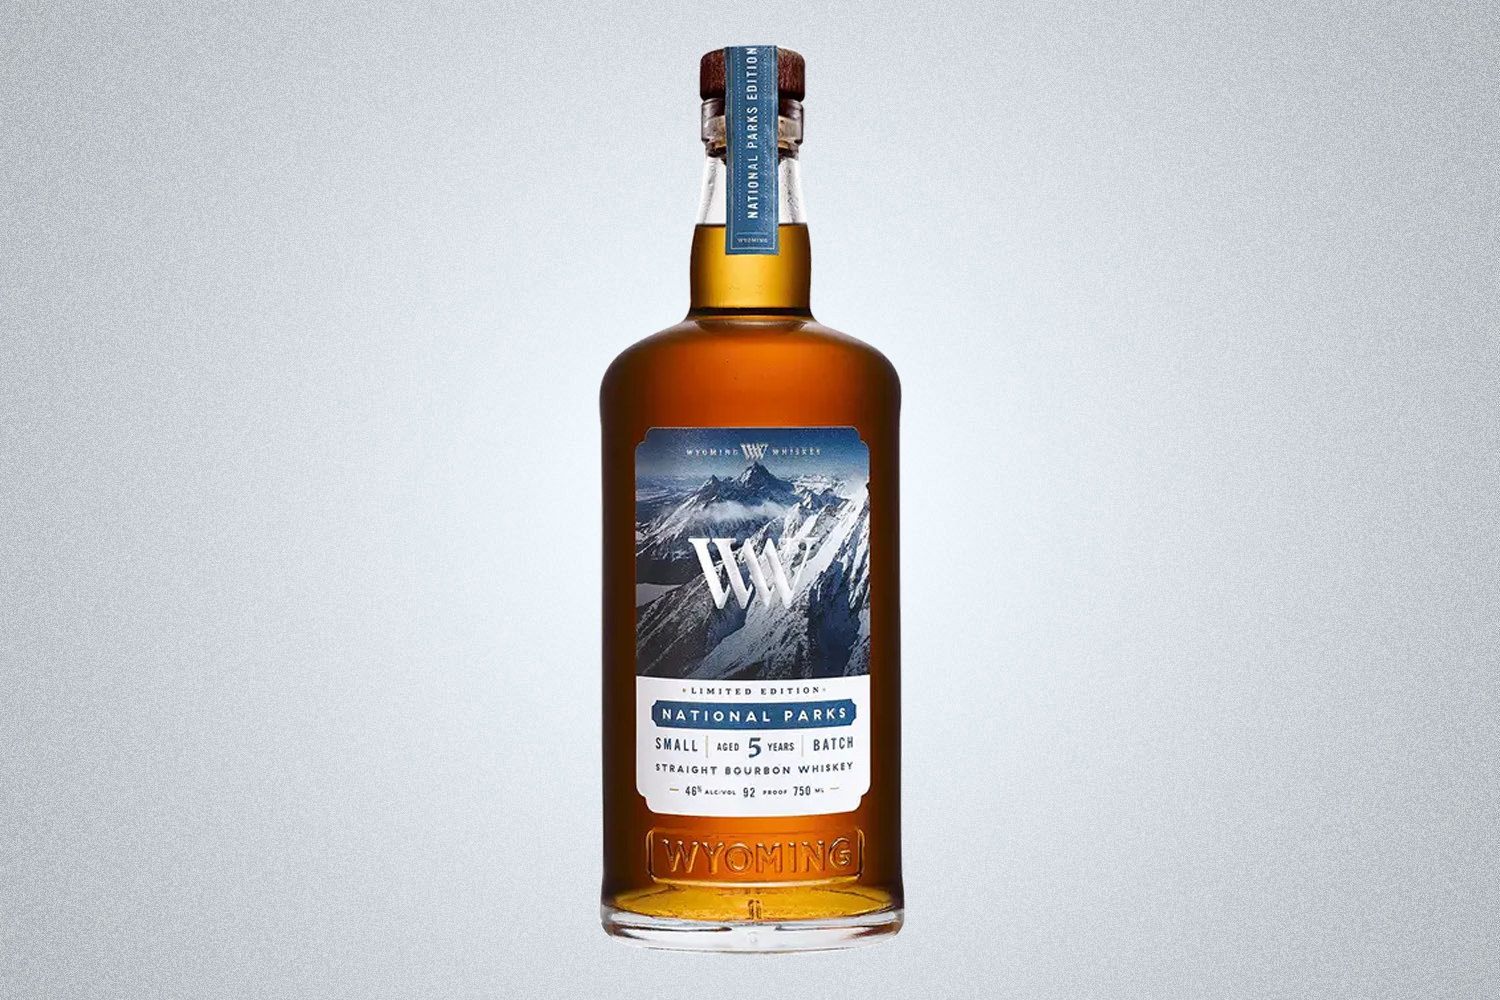 The Wyoming Whiskey National Parks Limited Edition is one of the best whiskeys for camping and supporting the national parks in 2022